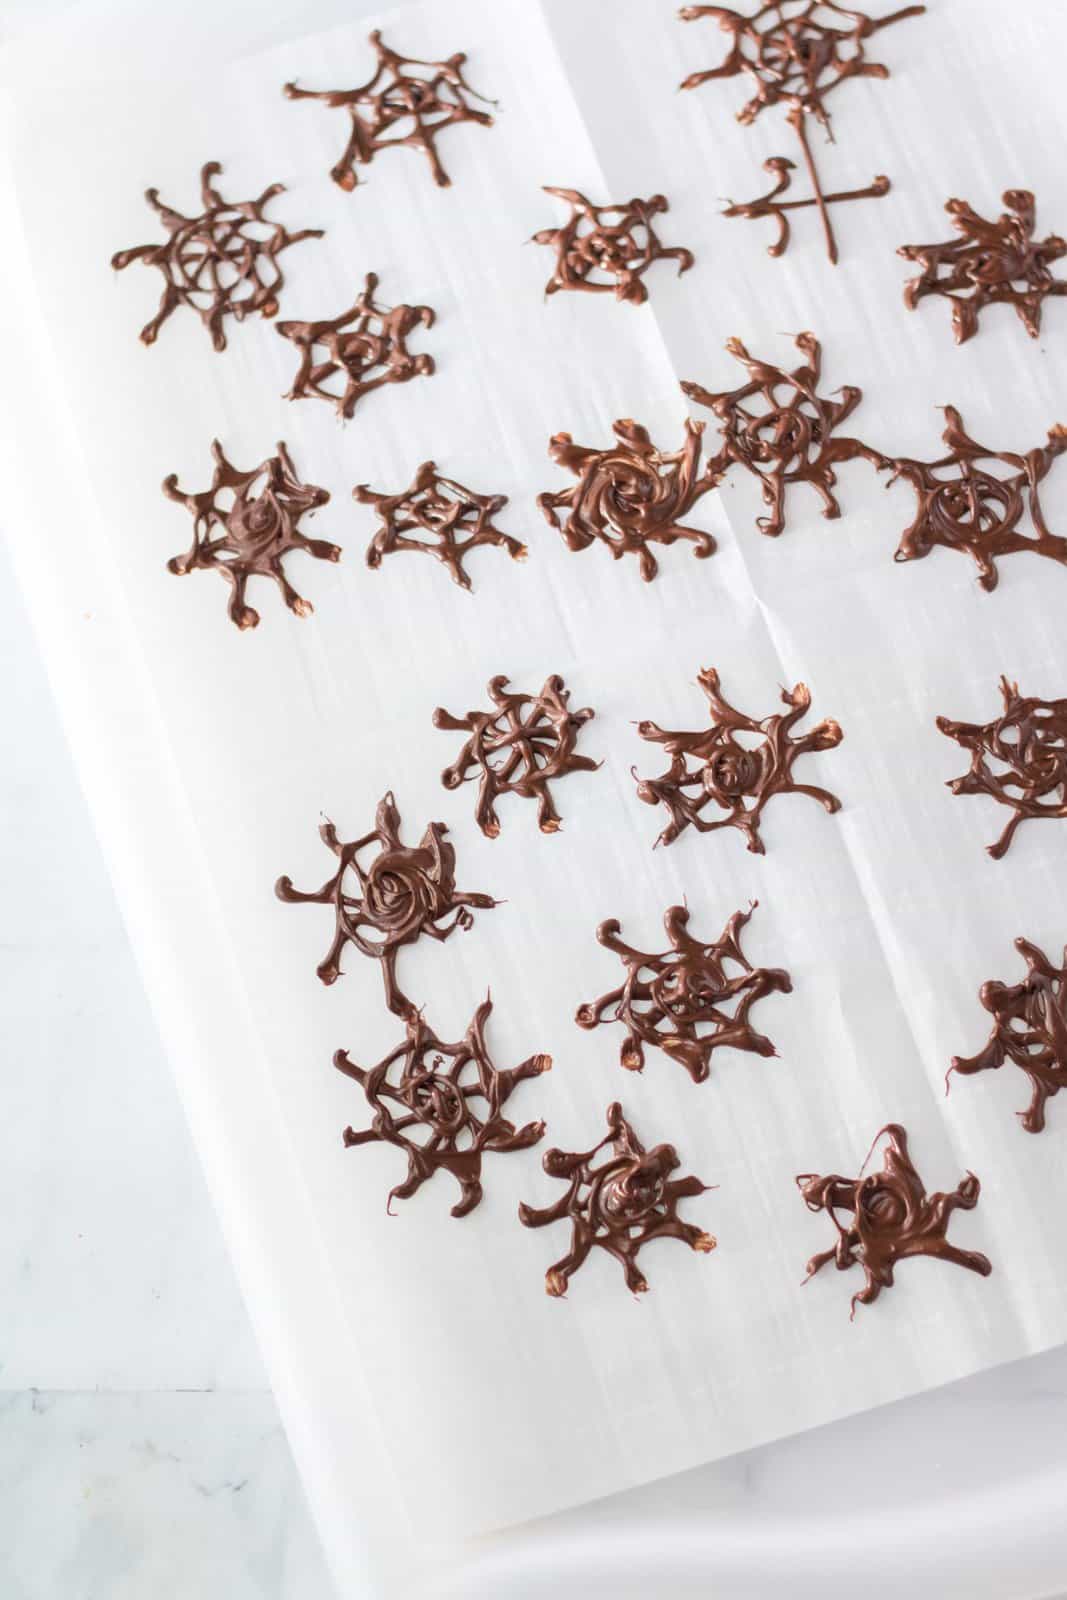 Chocolate spiderwebs piped onto parchment paper.